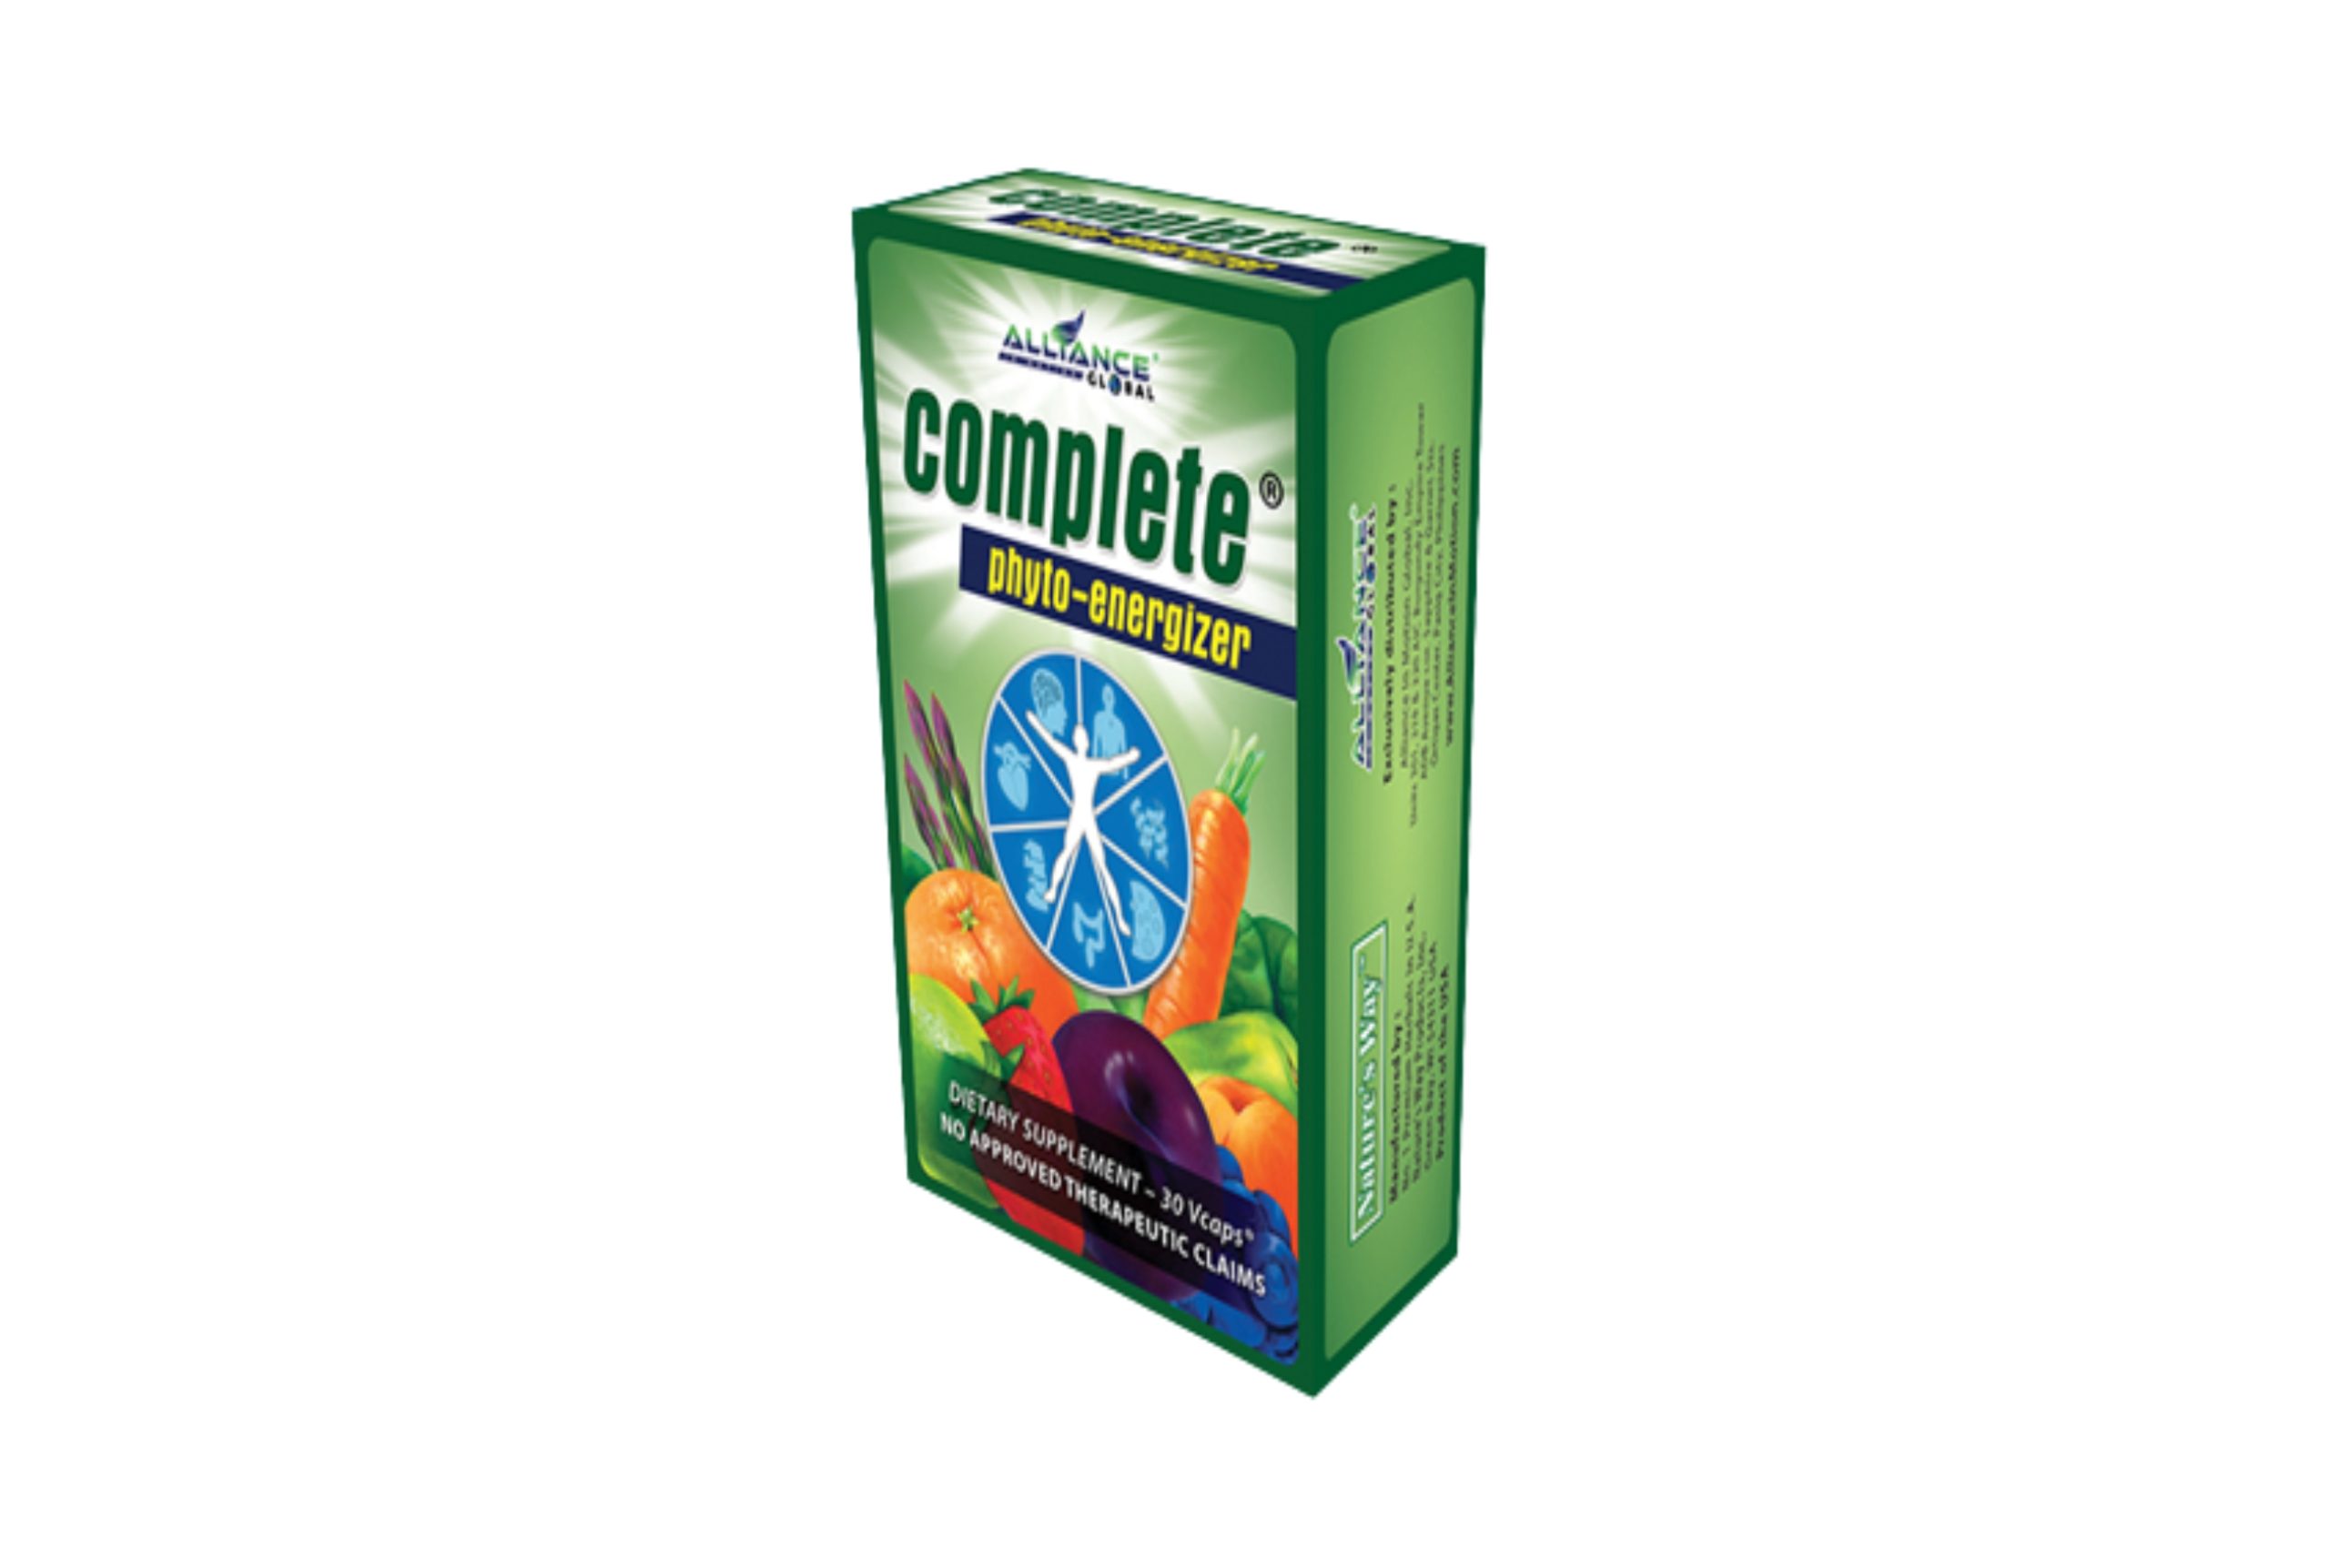 Complete Phyto-Energizer RP